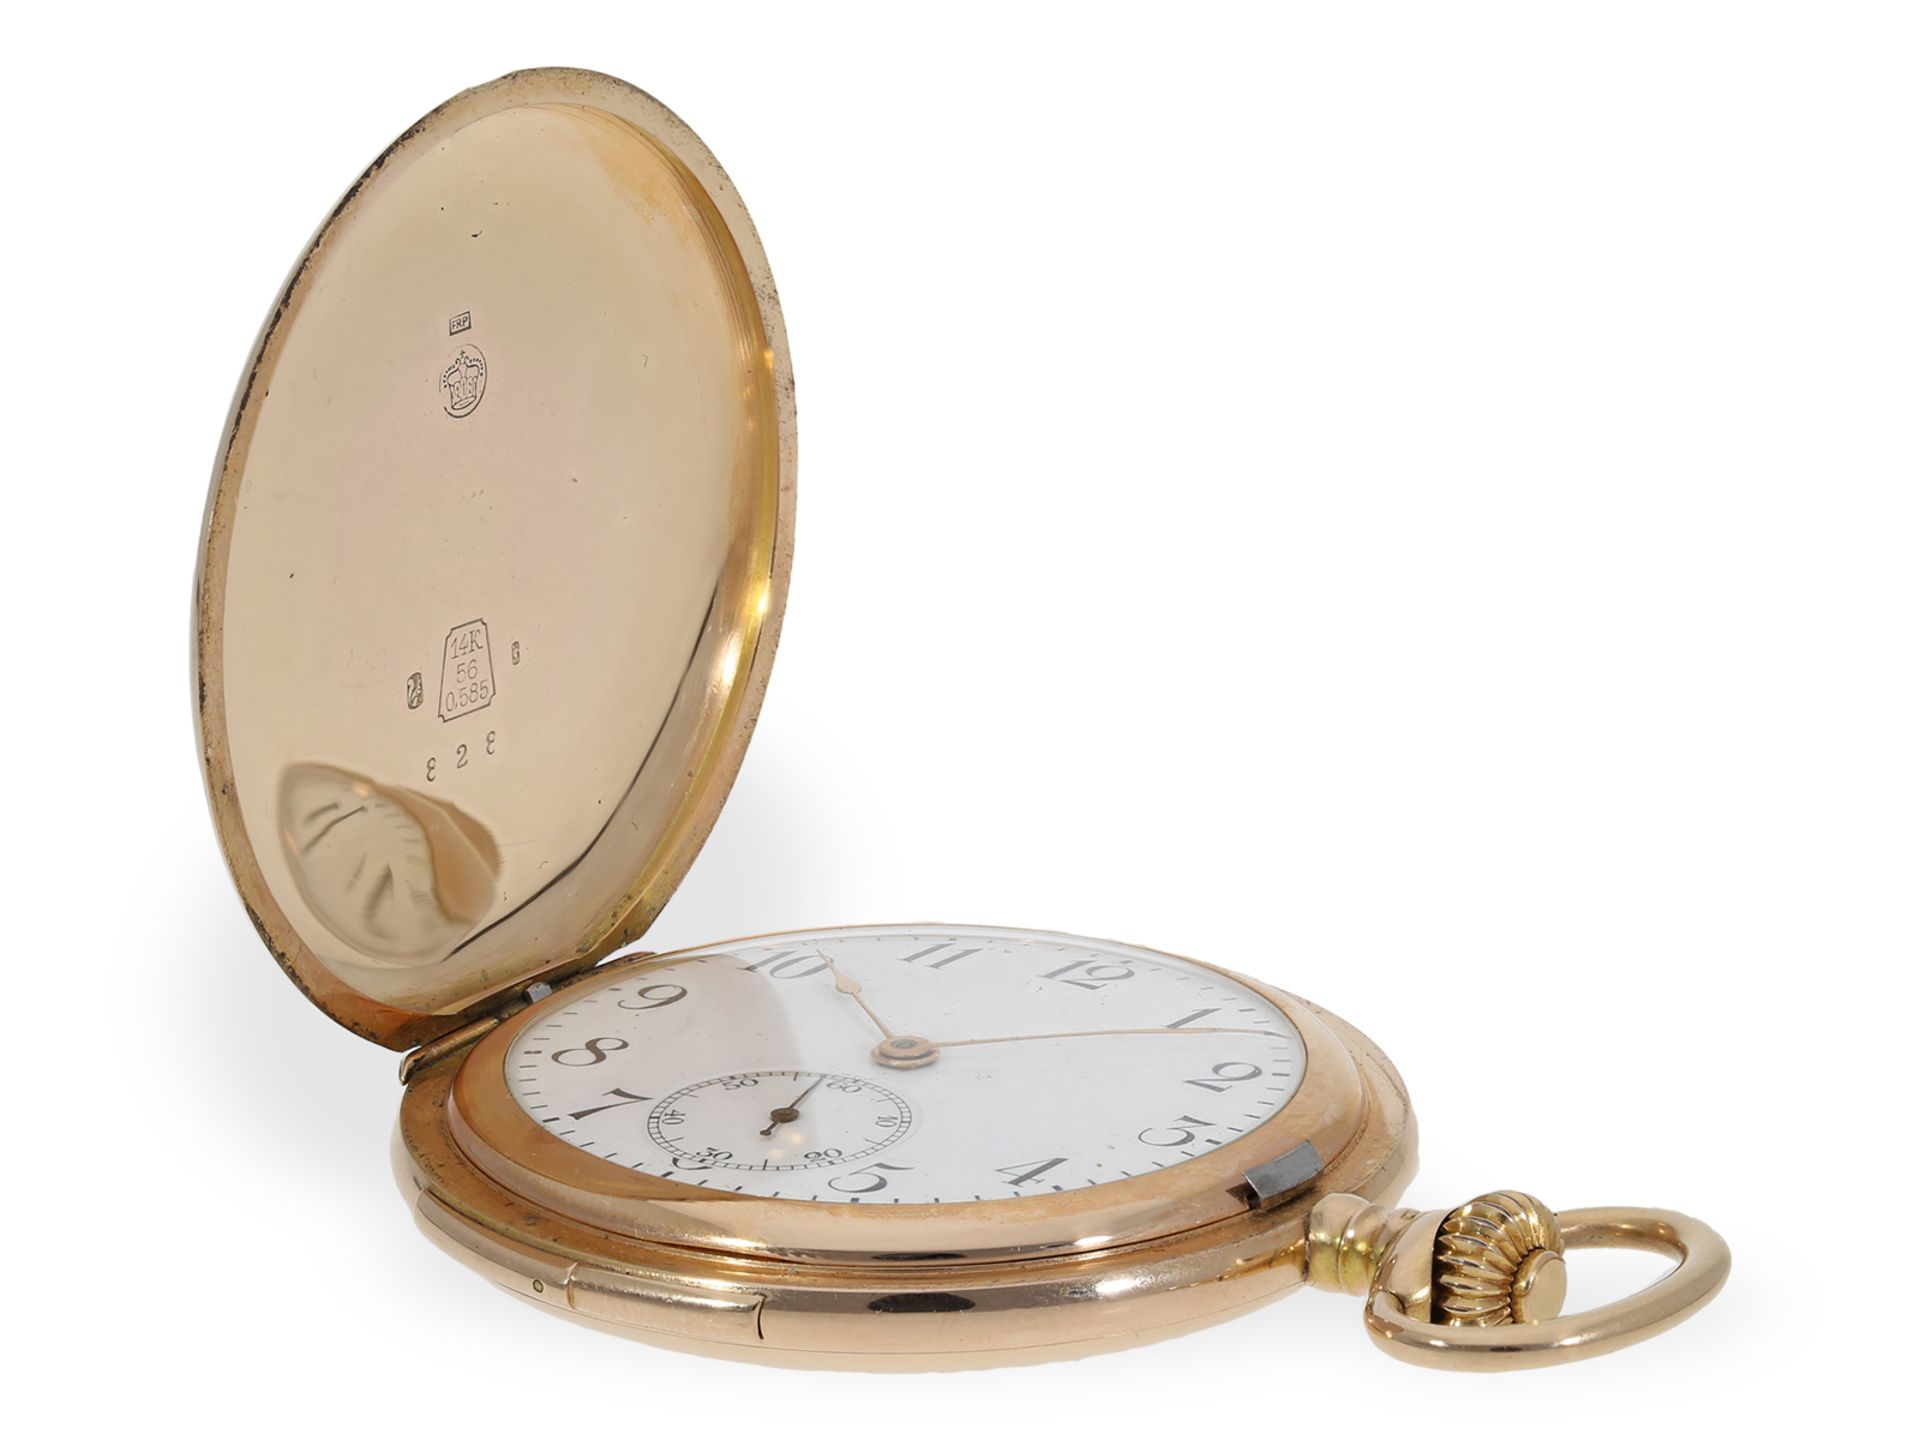 Pocket watch: very fine gold hunting case watch with quarter-hour repeater, probably Piguet calibre, - Image 4 of 6